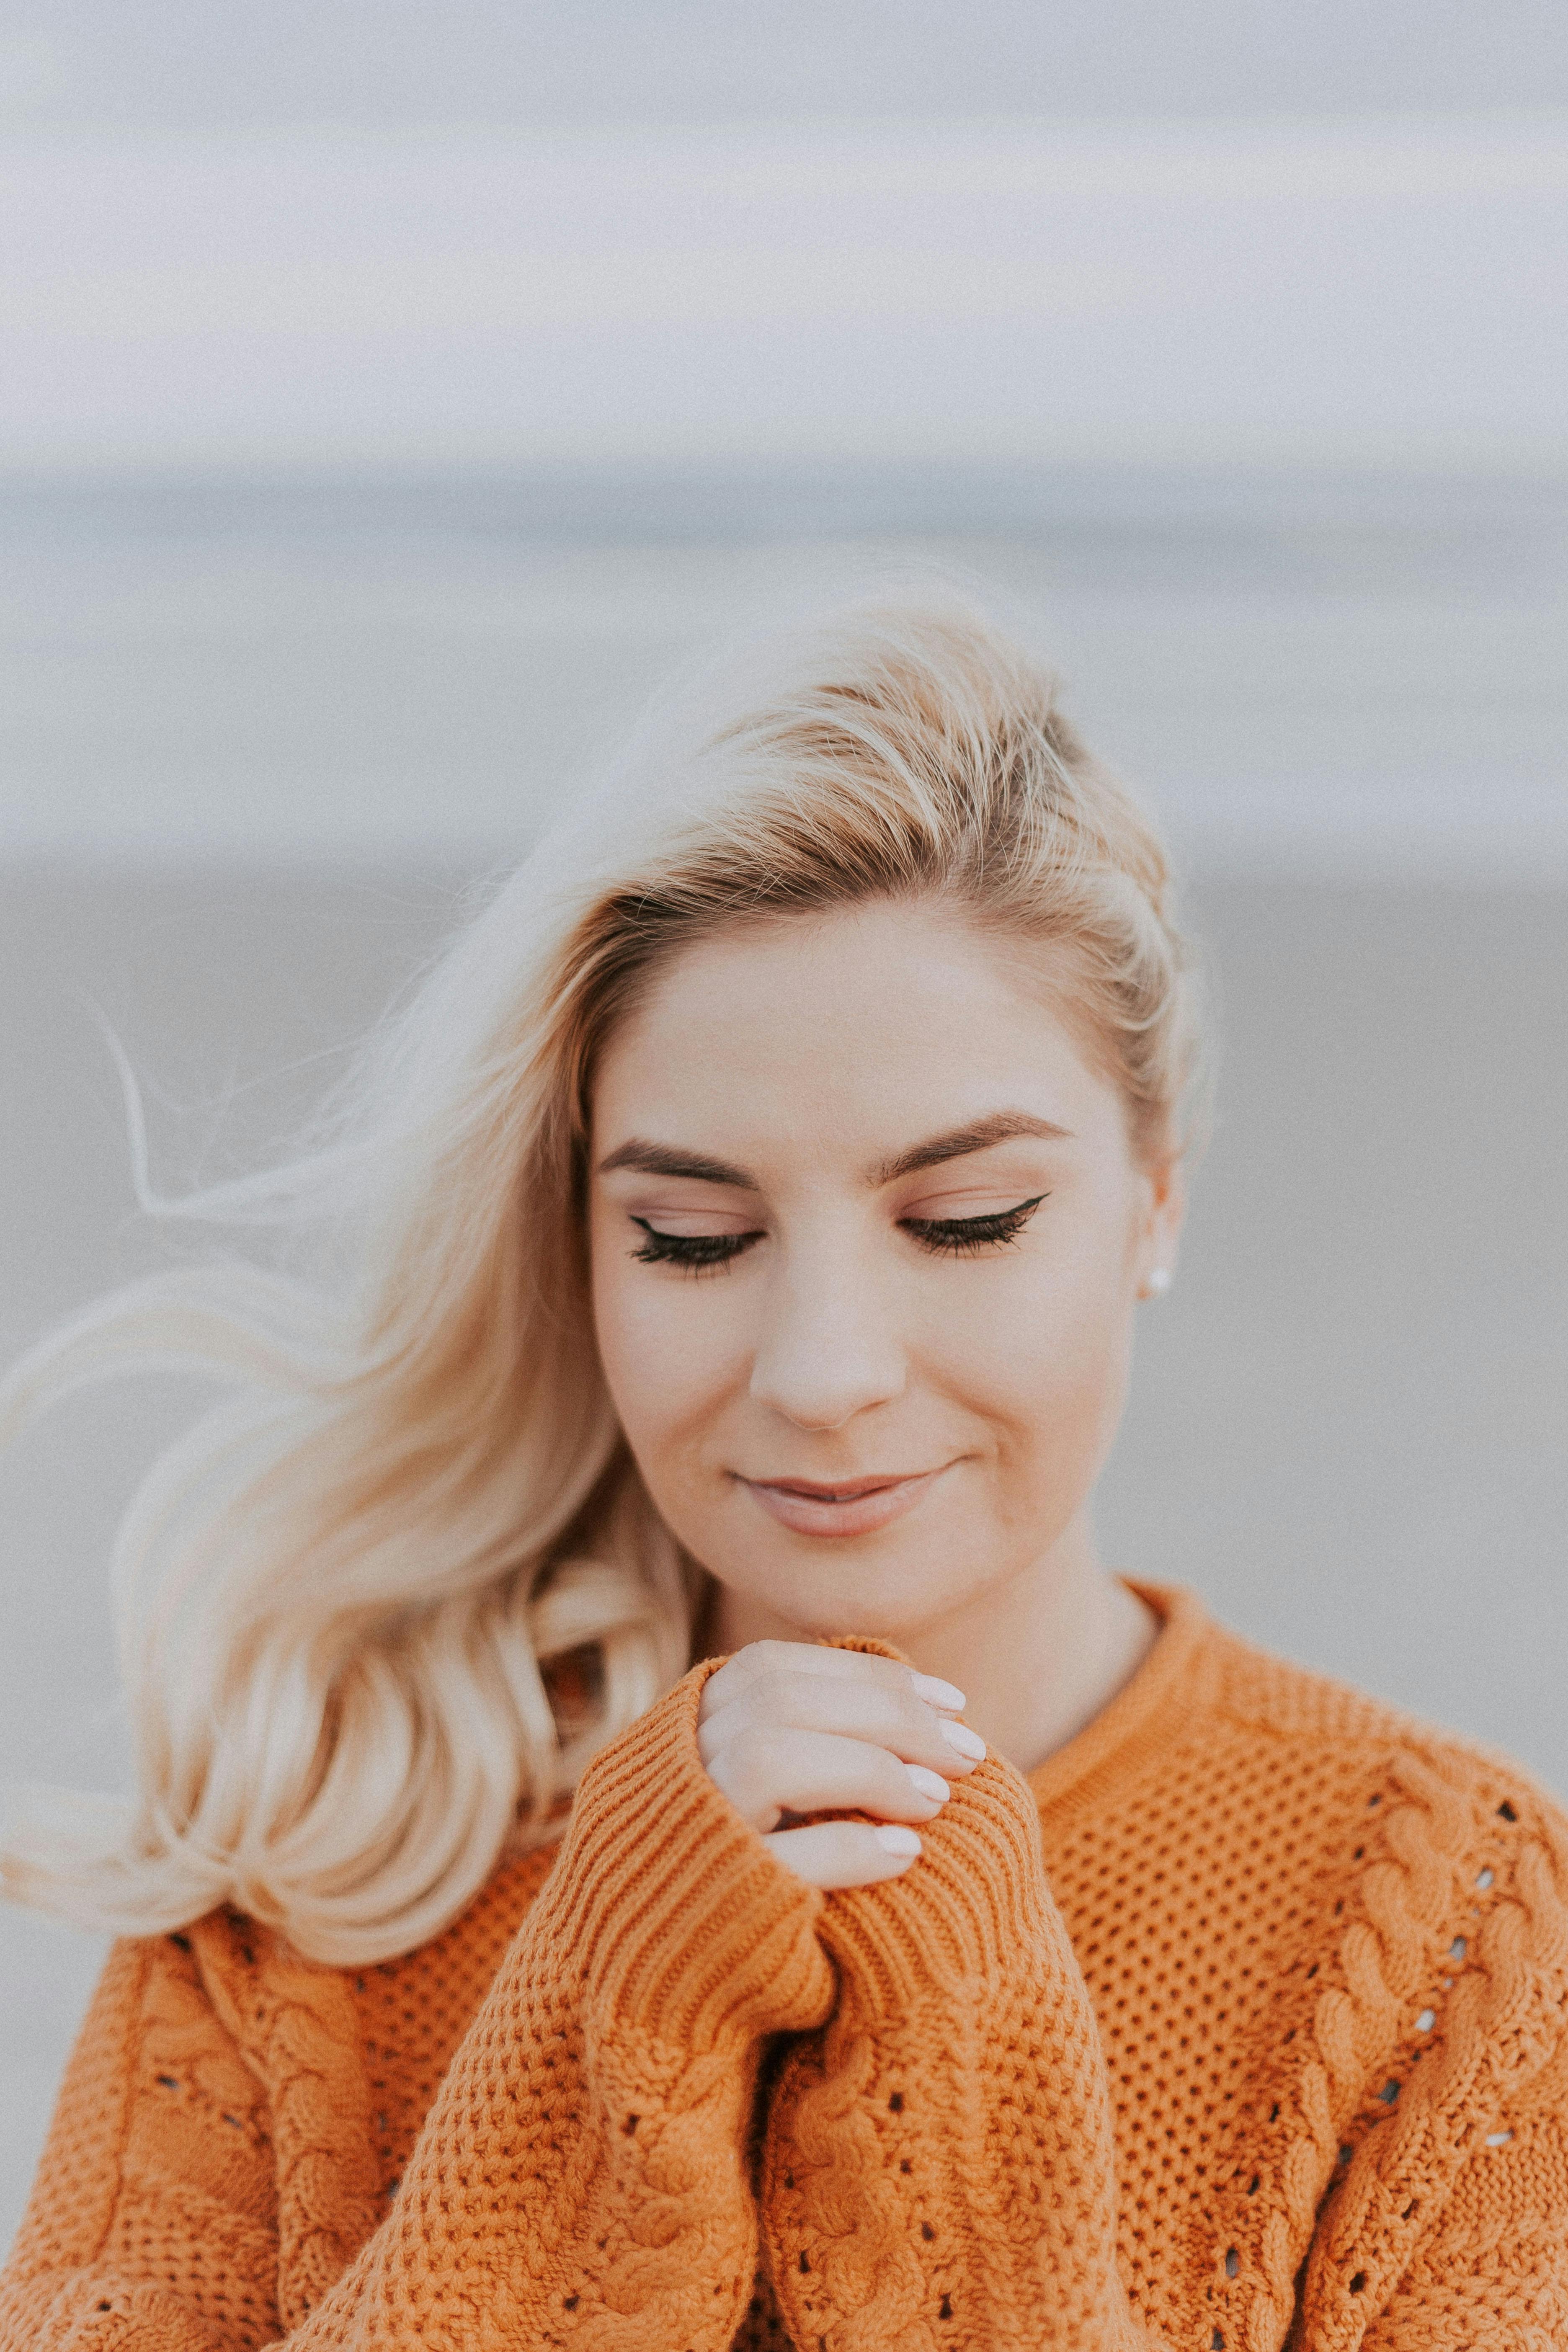 A woman smiling while deep in thought | Source: Pexels